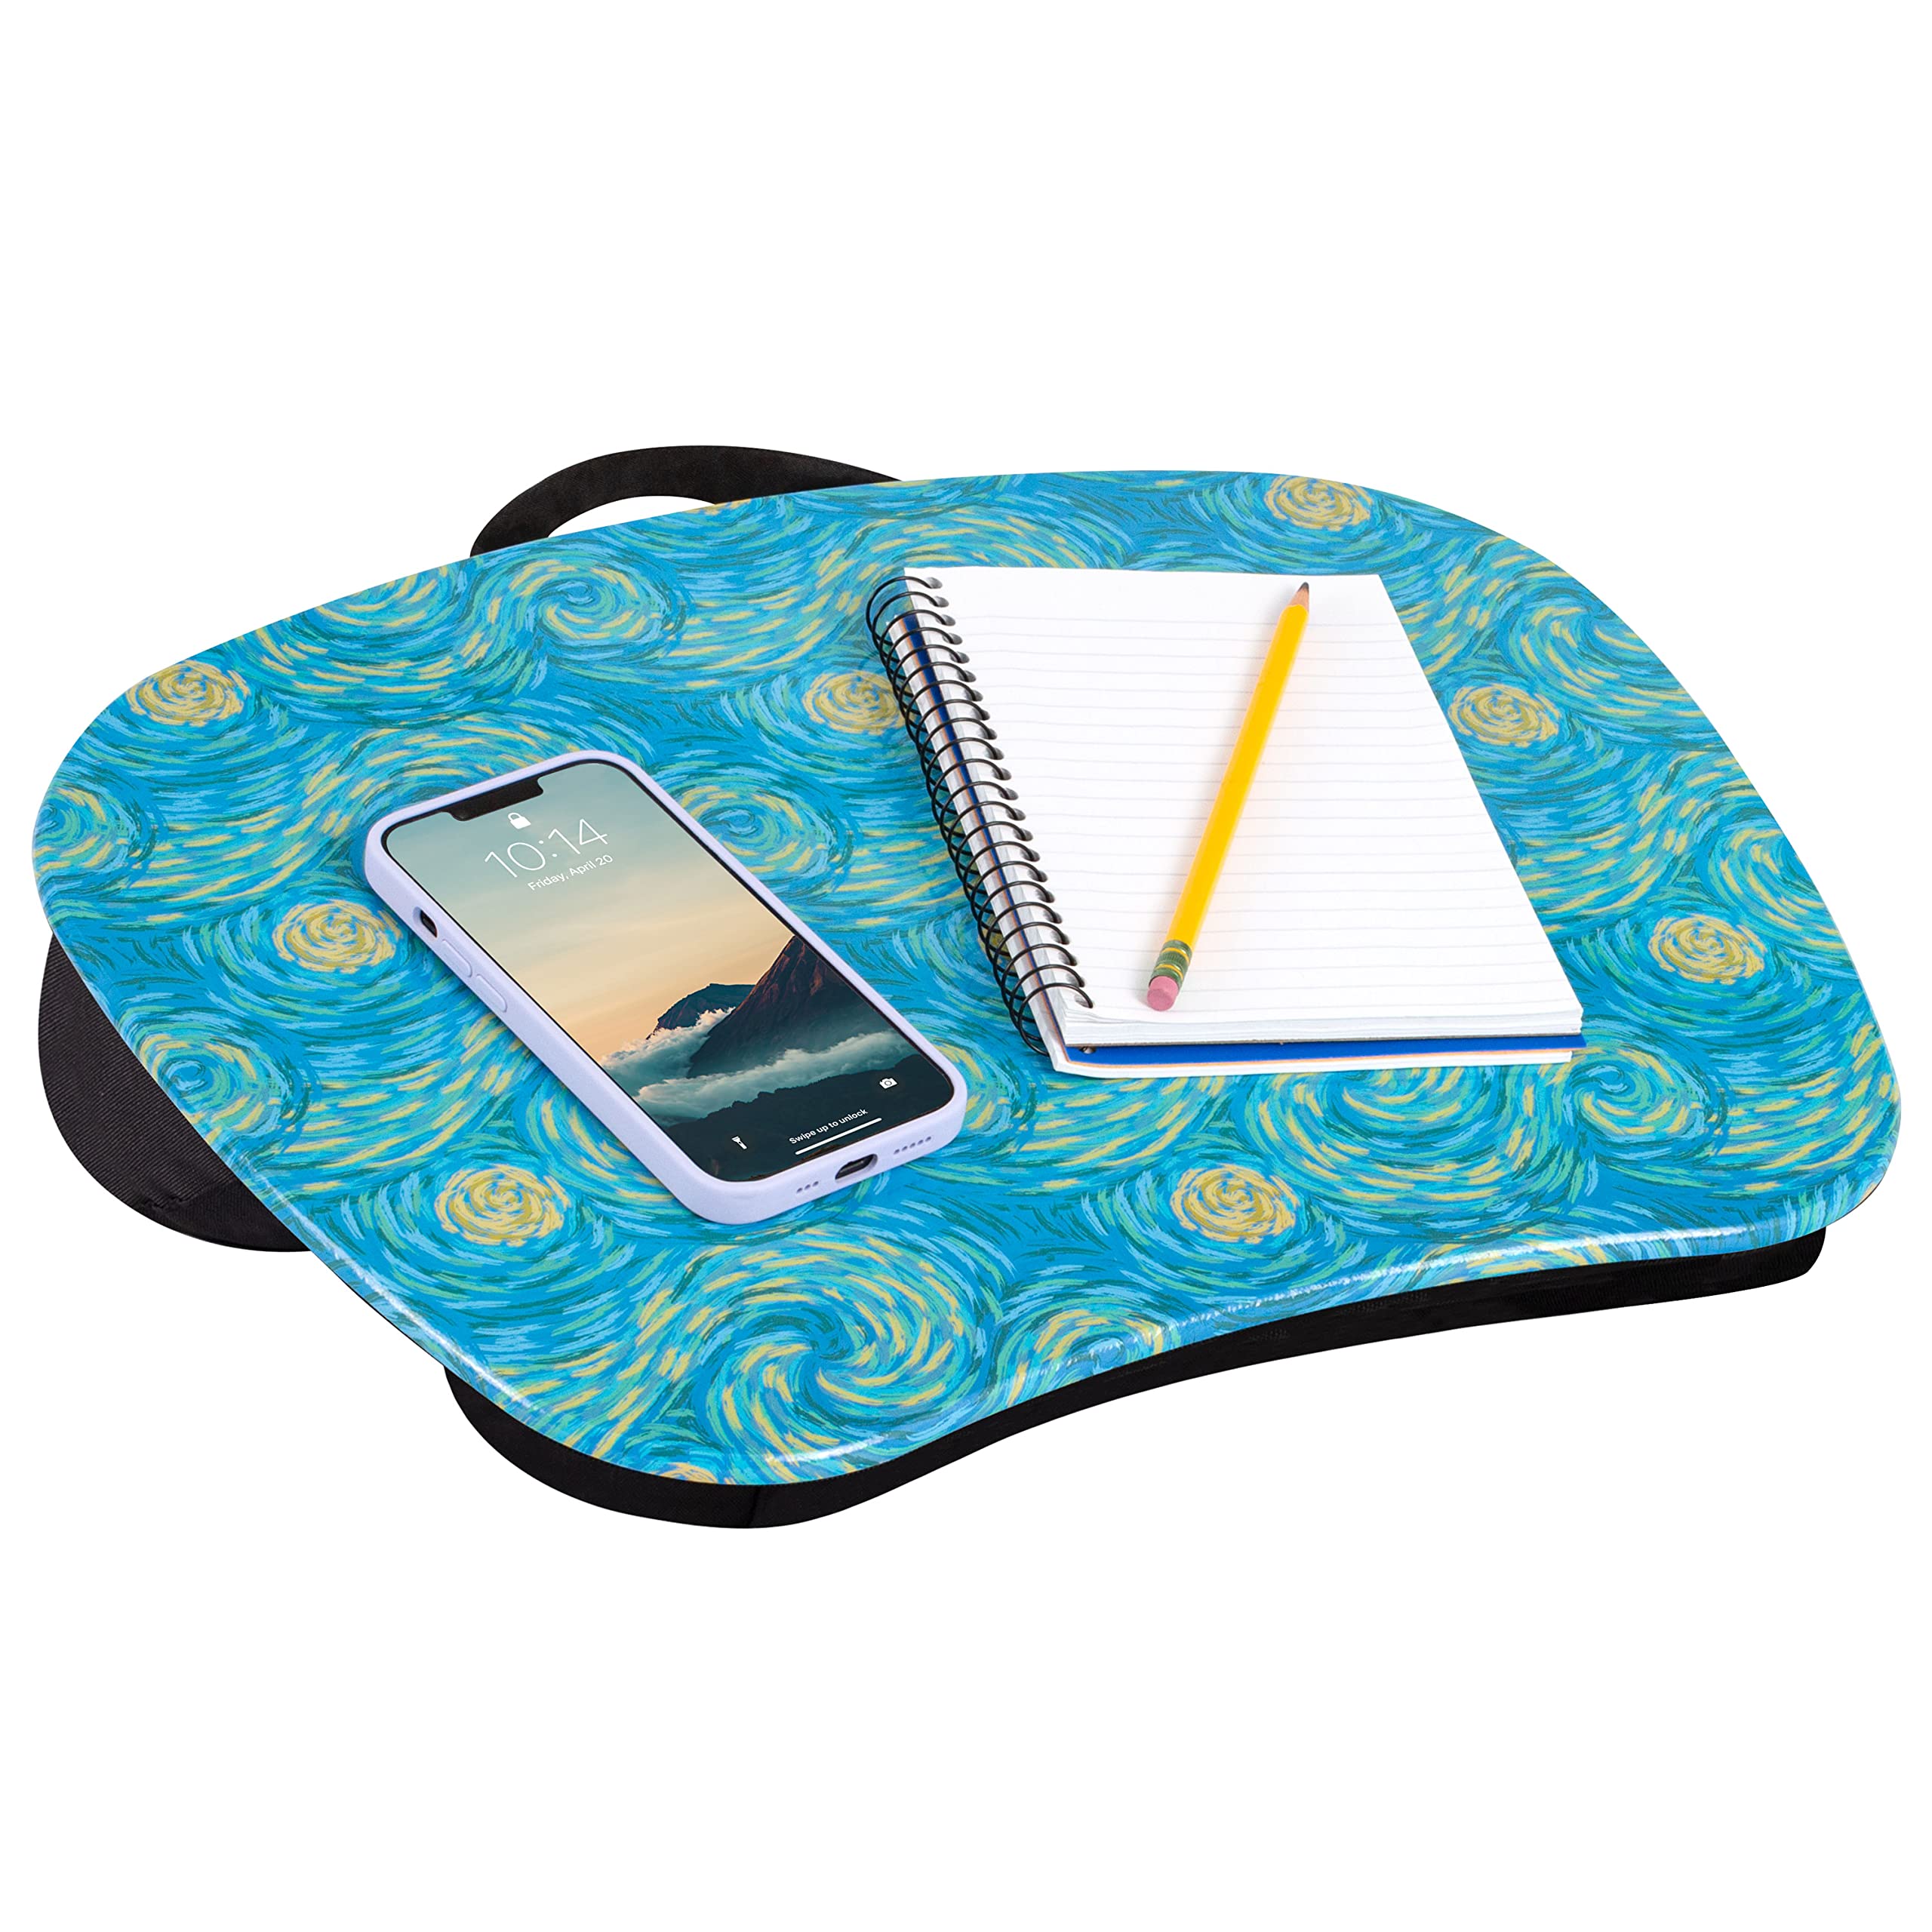 LapGear MyStyle Portable Lap Desk with Cushion - Starry Blue - Fits up to 15.6 Inch Laptops - Style No. 45339